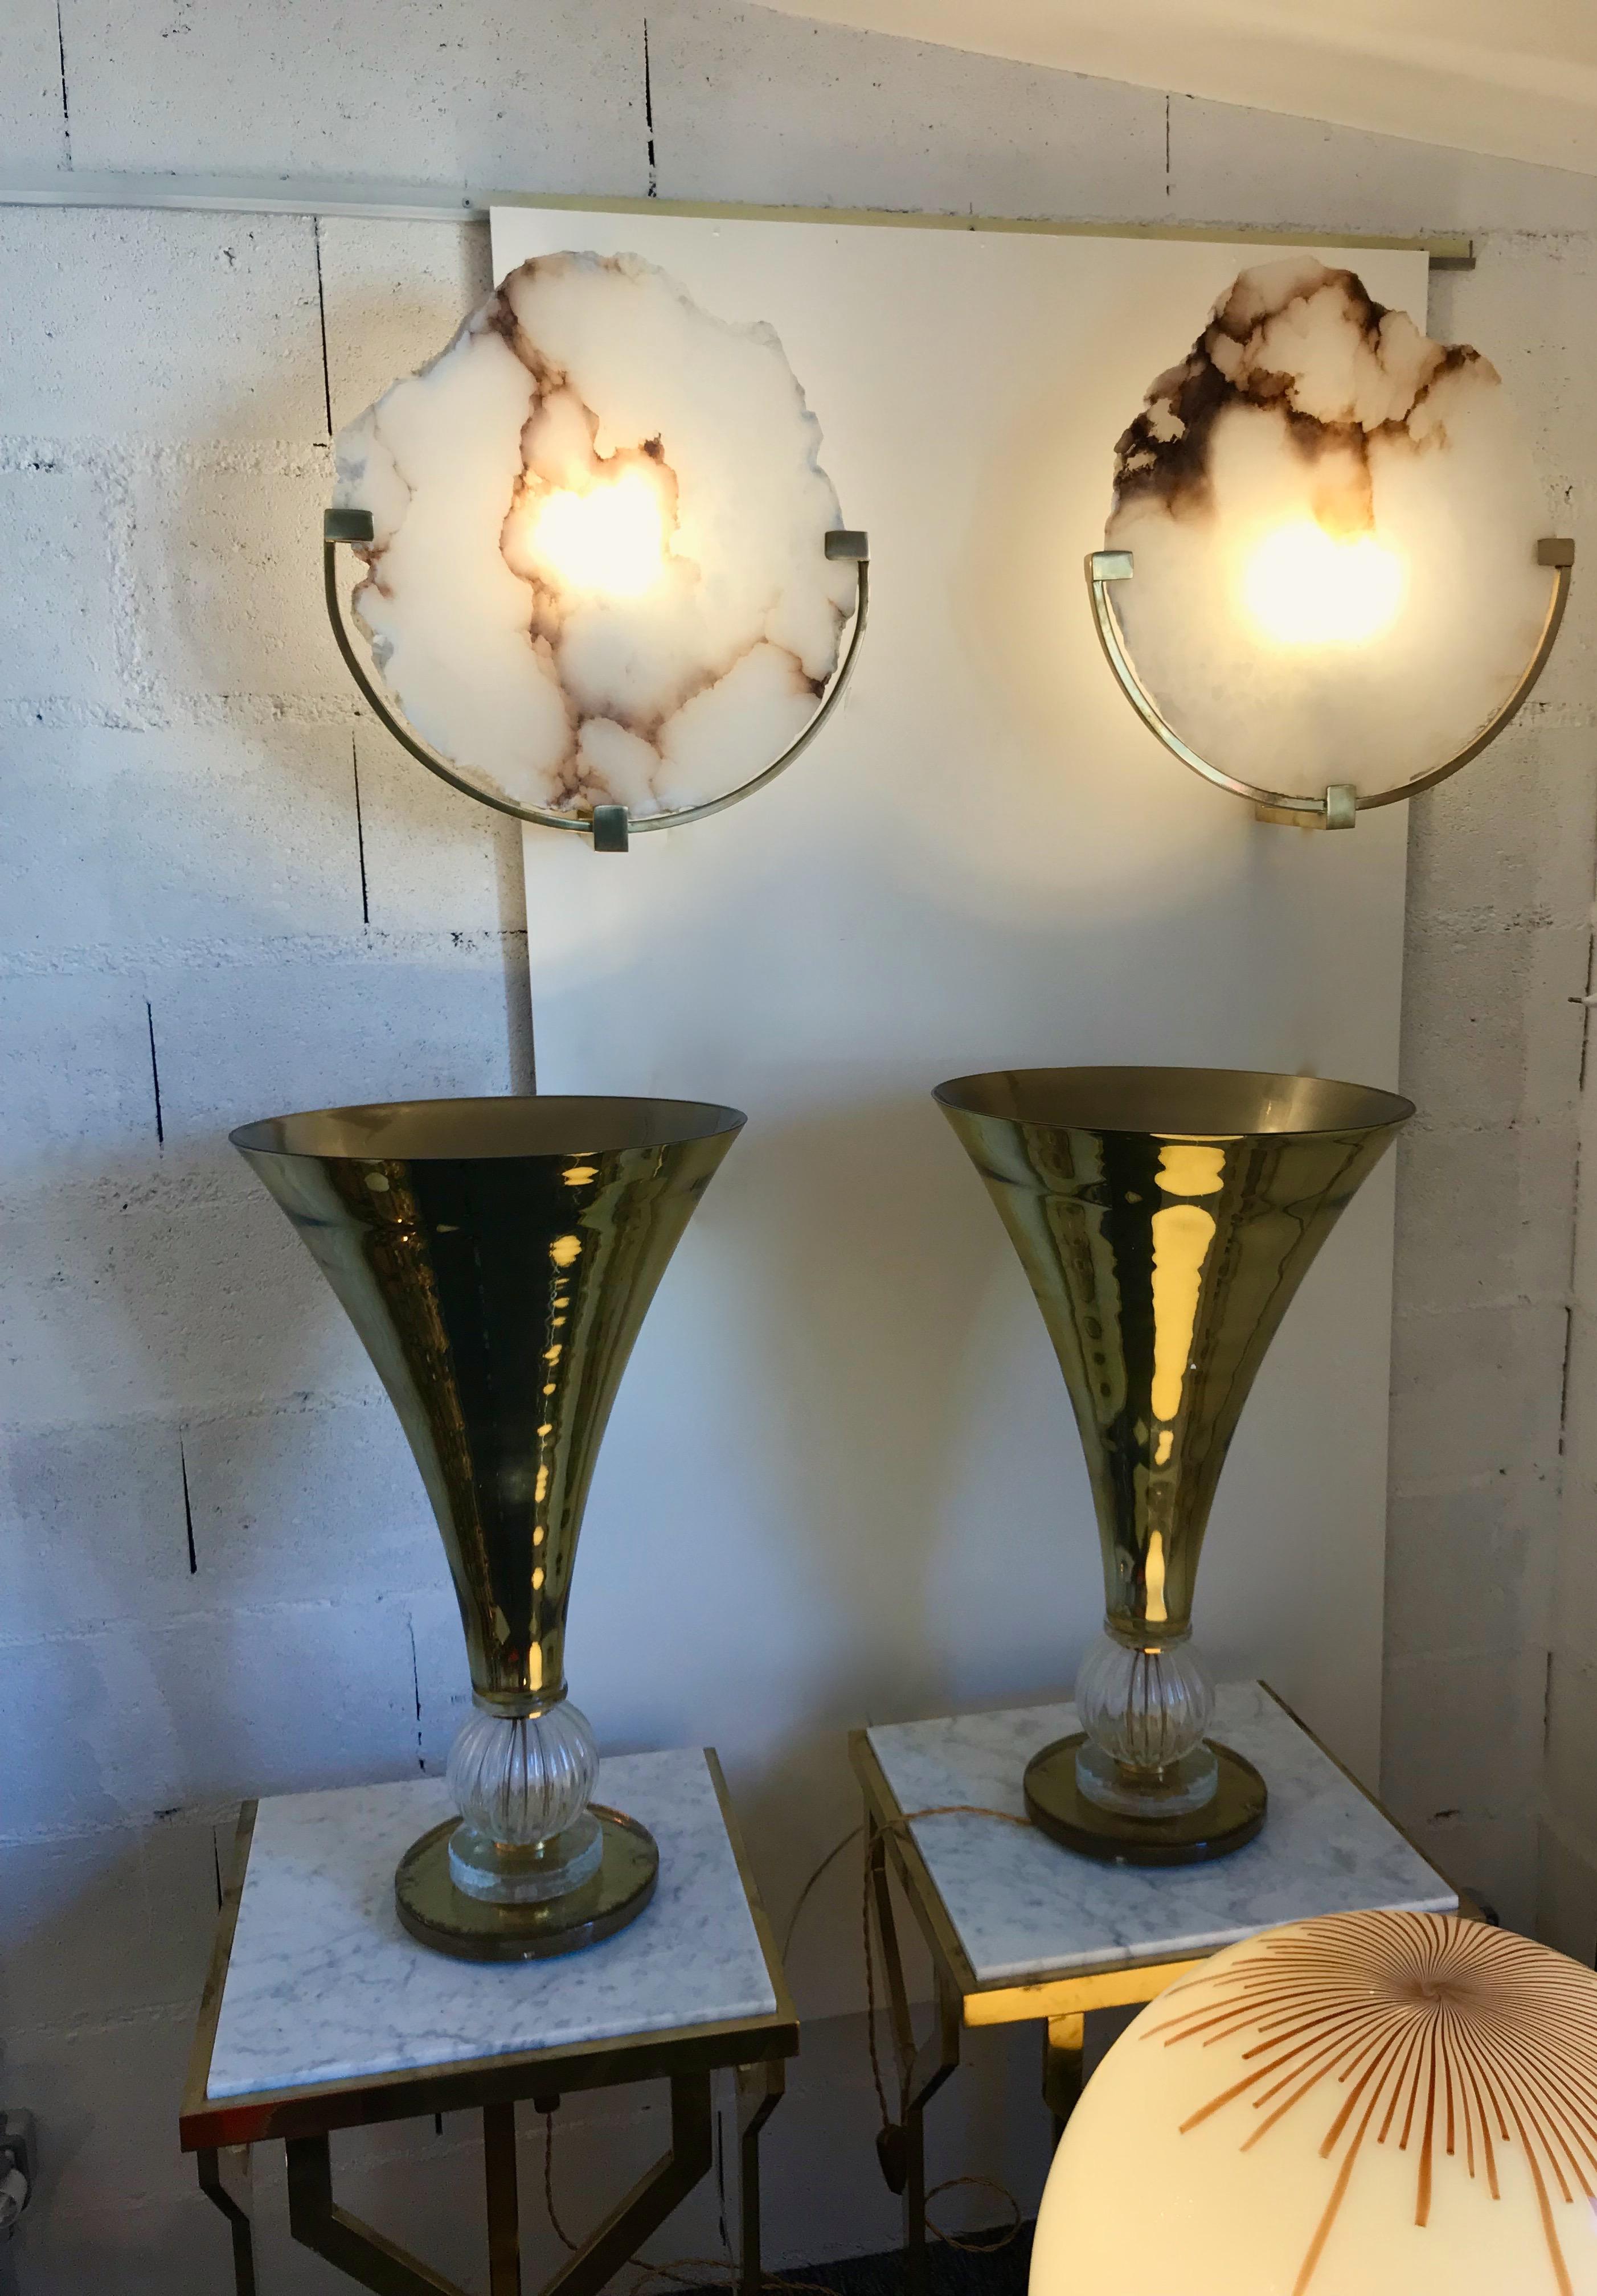 Pair of sconces or wall lights cut alabaster leaves from Carrara Italy and brass structure, made on order by a small Italian workshop. Few exclusive production. Very quality and unusual work, different from marble works.